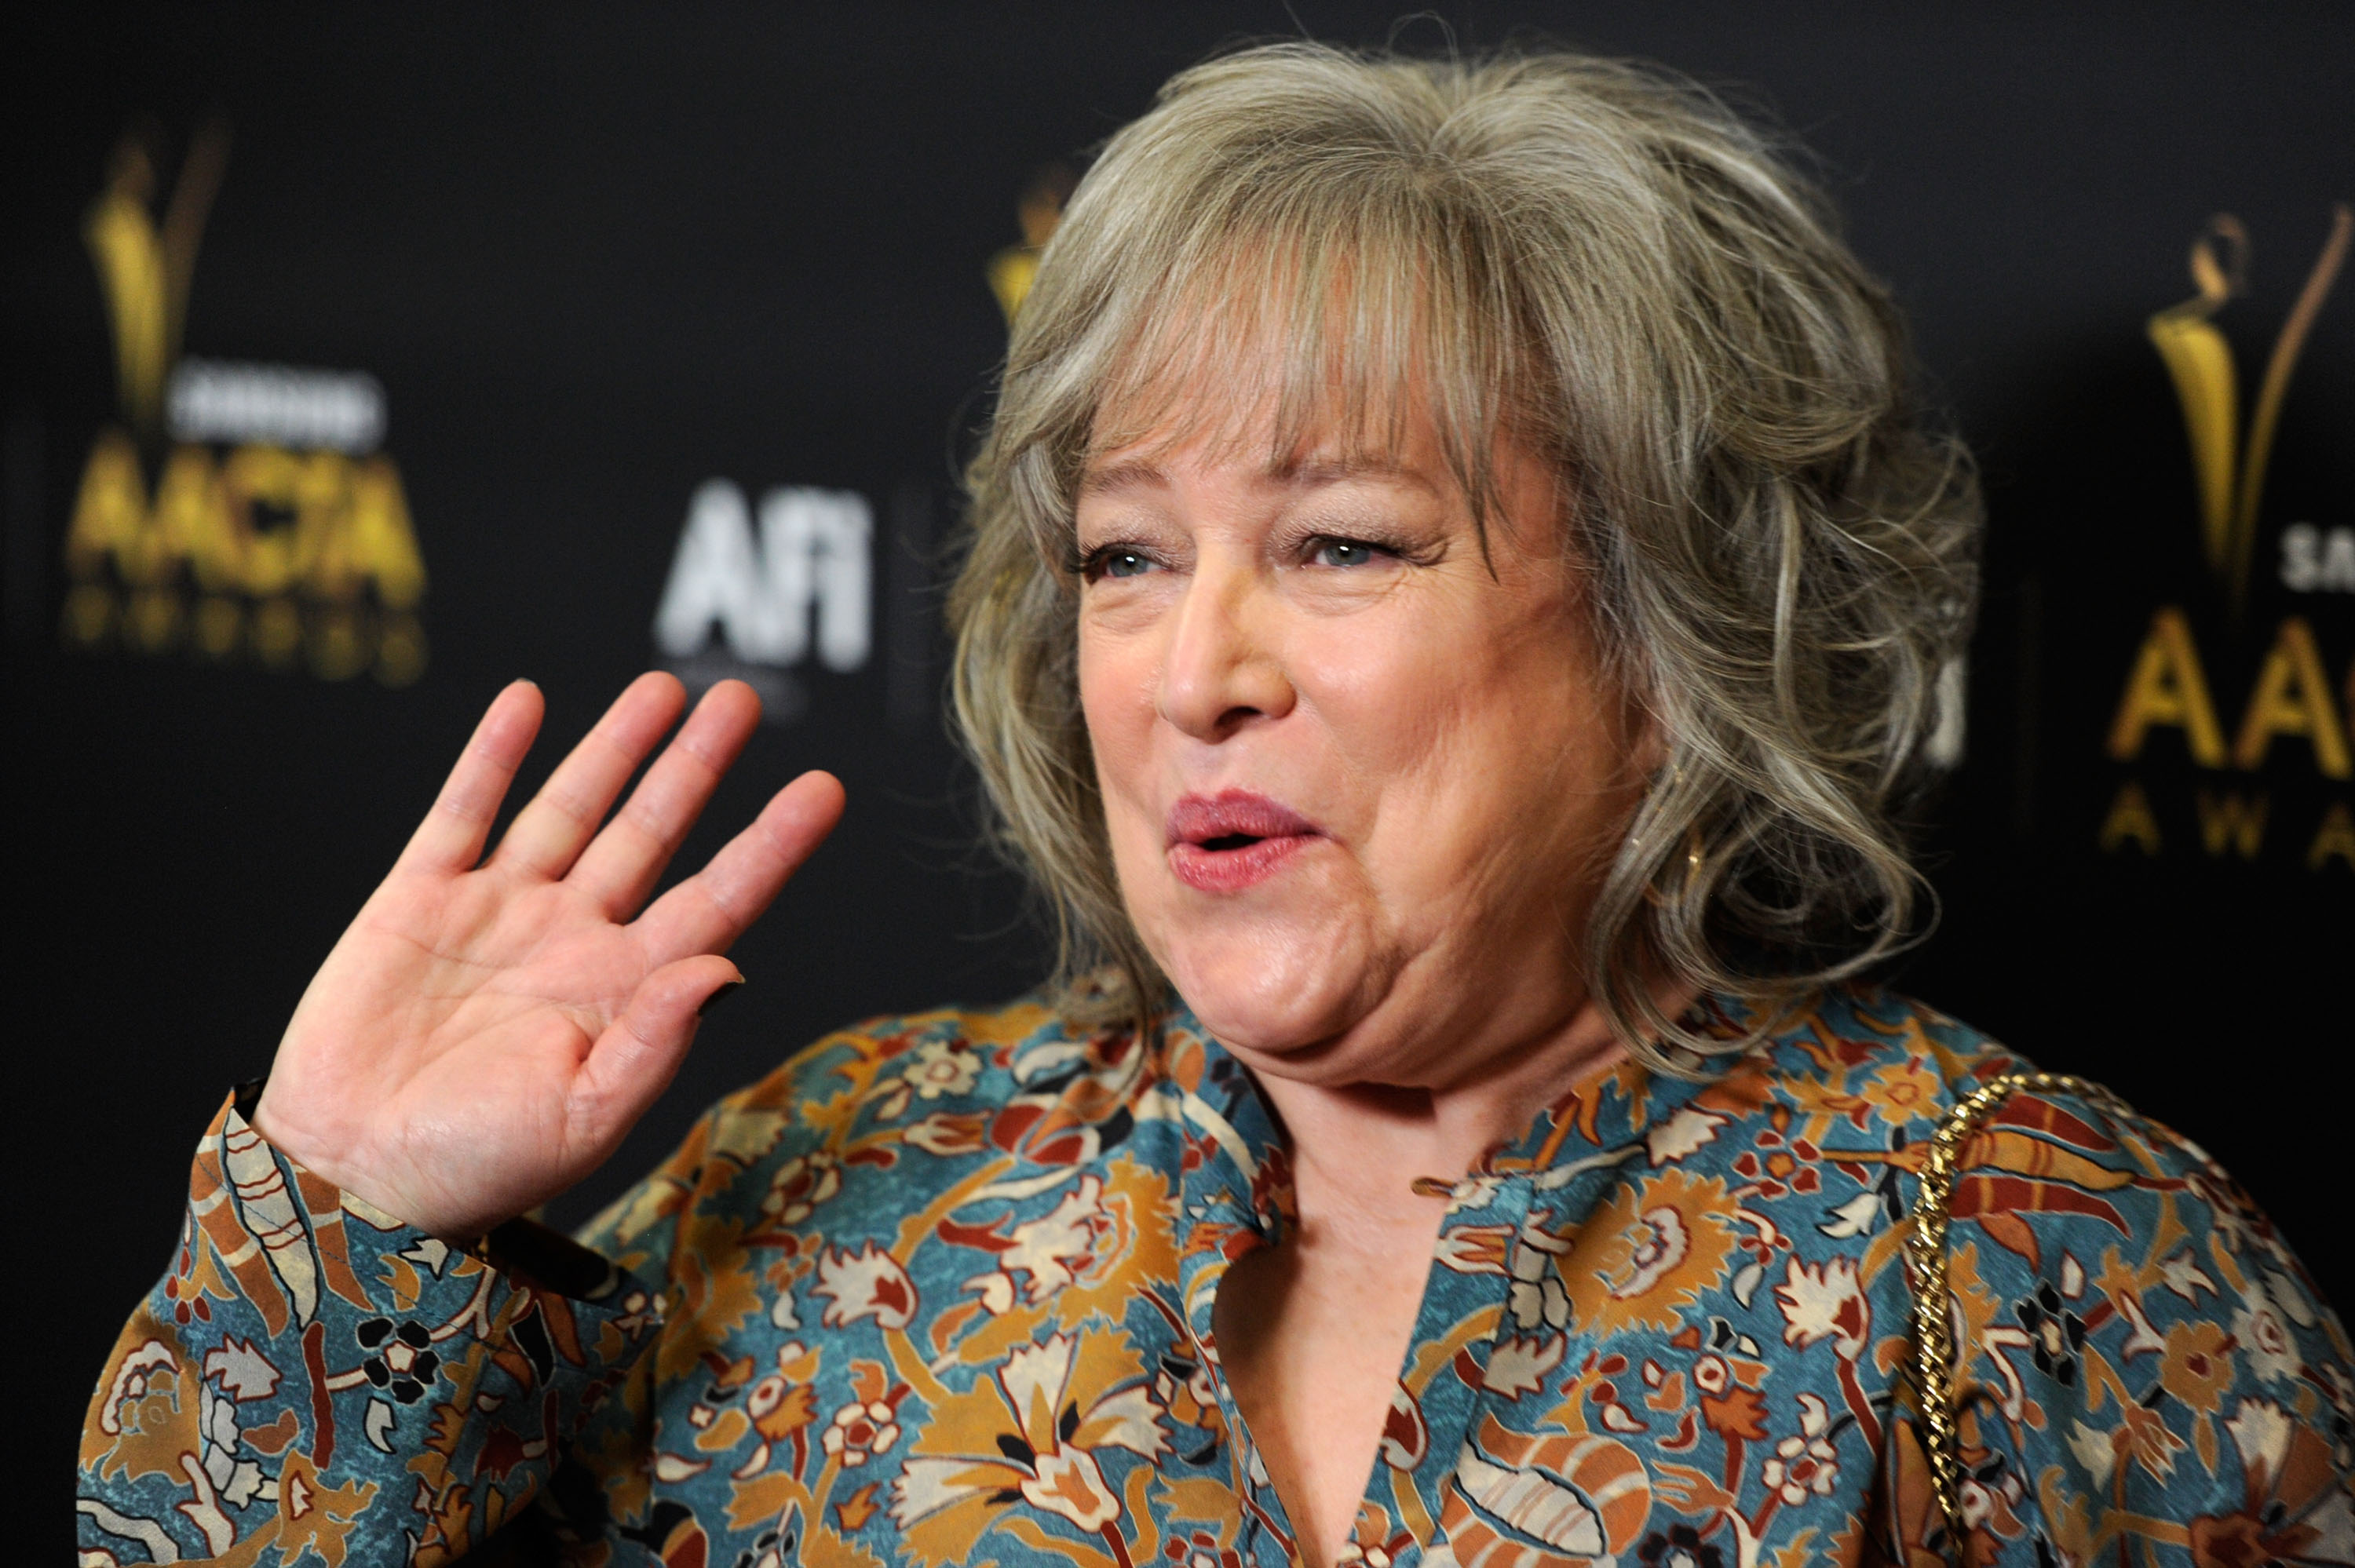 Actress Kathy Bates arrives at the Australian Academy of Cinema and Television Arts' 1st Annual Awards at Soho House on January 27, 2012 in West Hollywood, California | Source: Getty Images